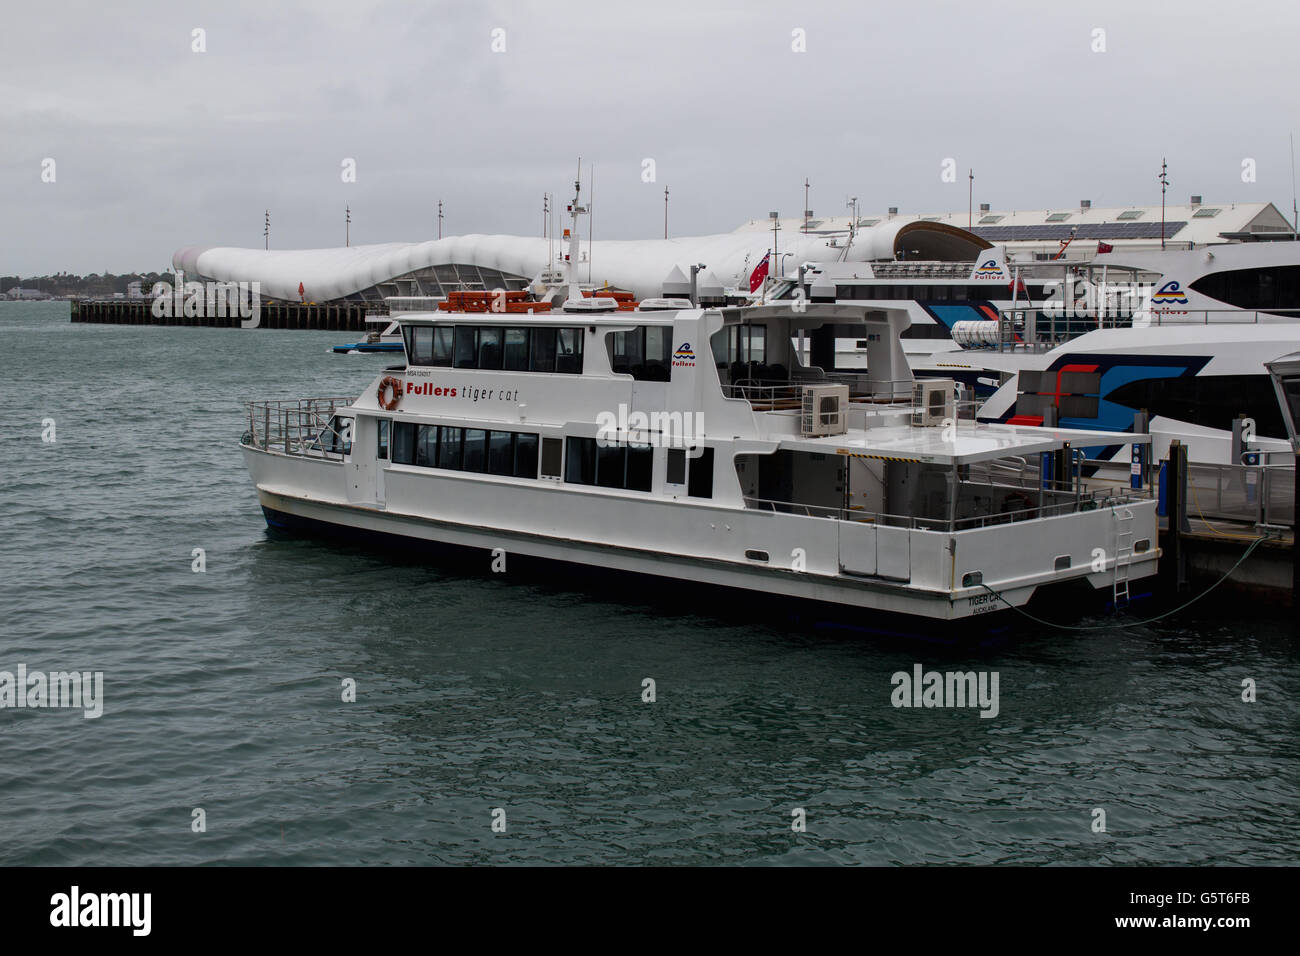 Fullers Auckland Ferry Tiger Cat Stock Photo